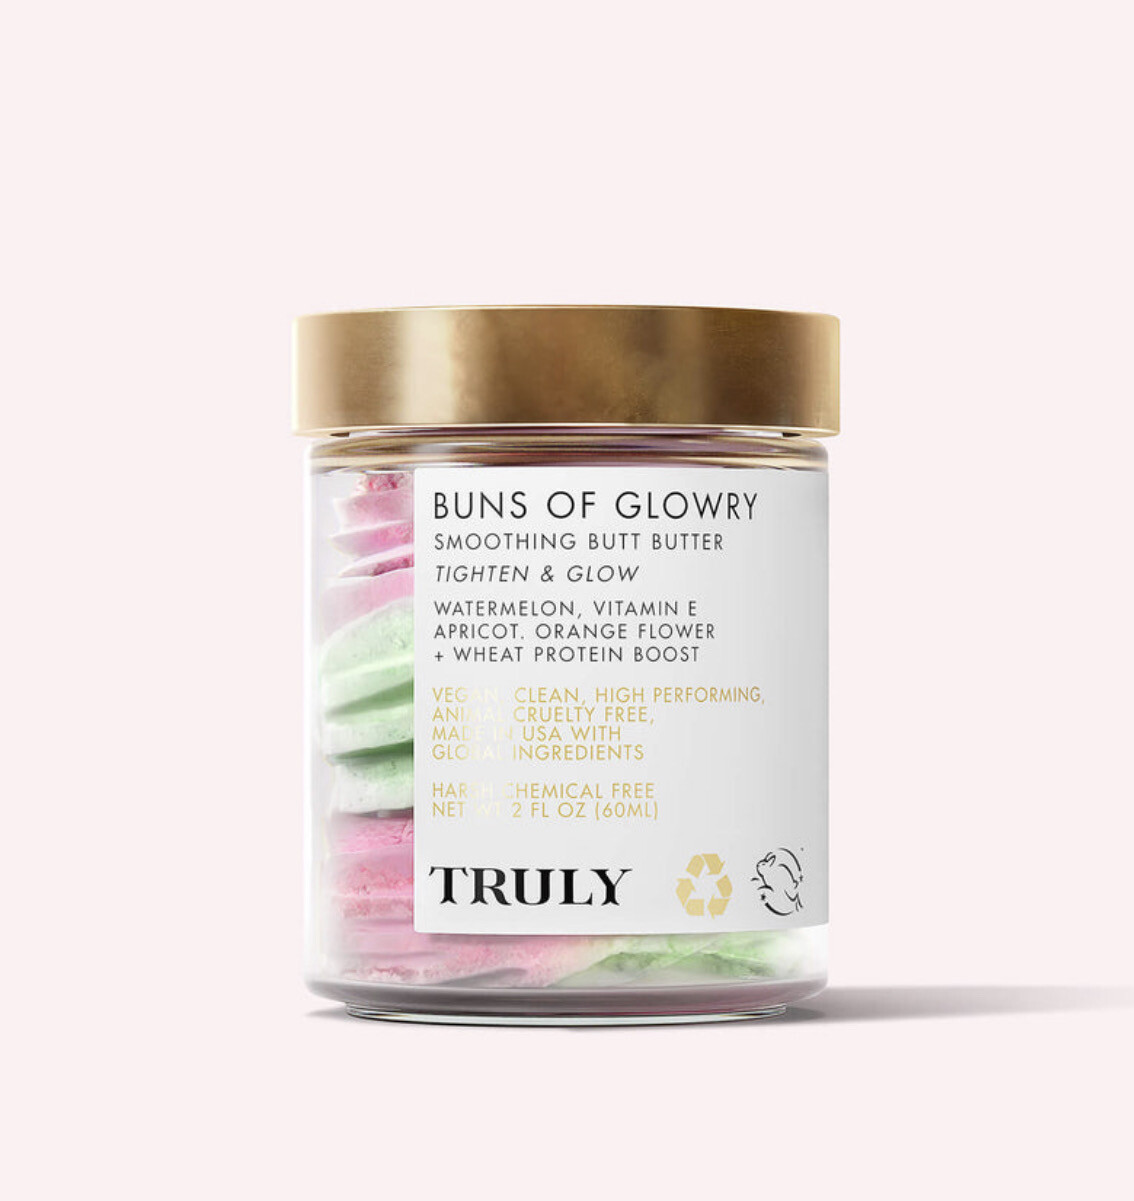 TRULY - Buns of Glowry Tighten & Glow Smoothing Butt Butter